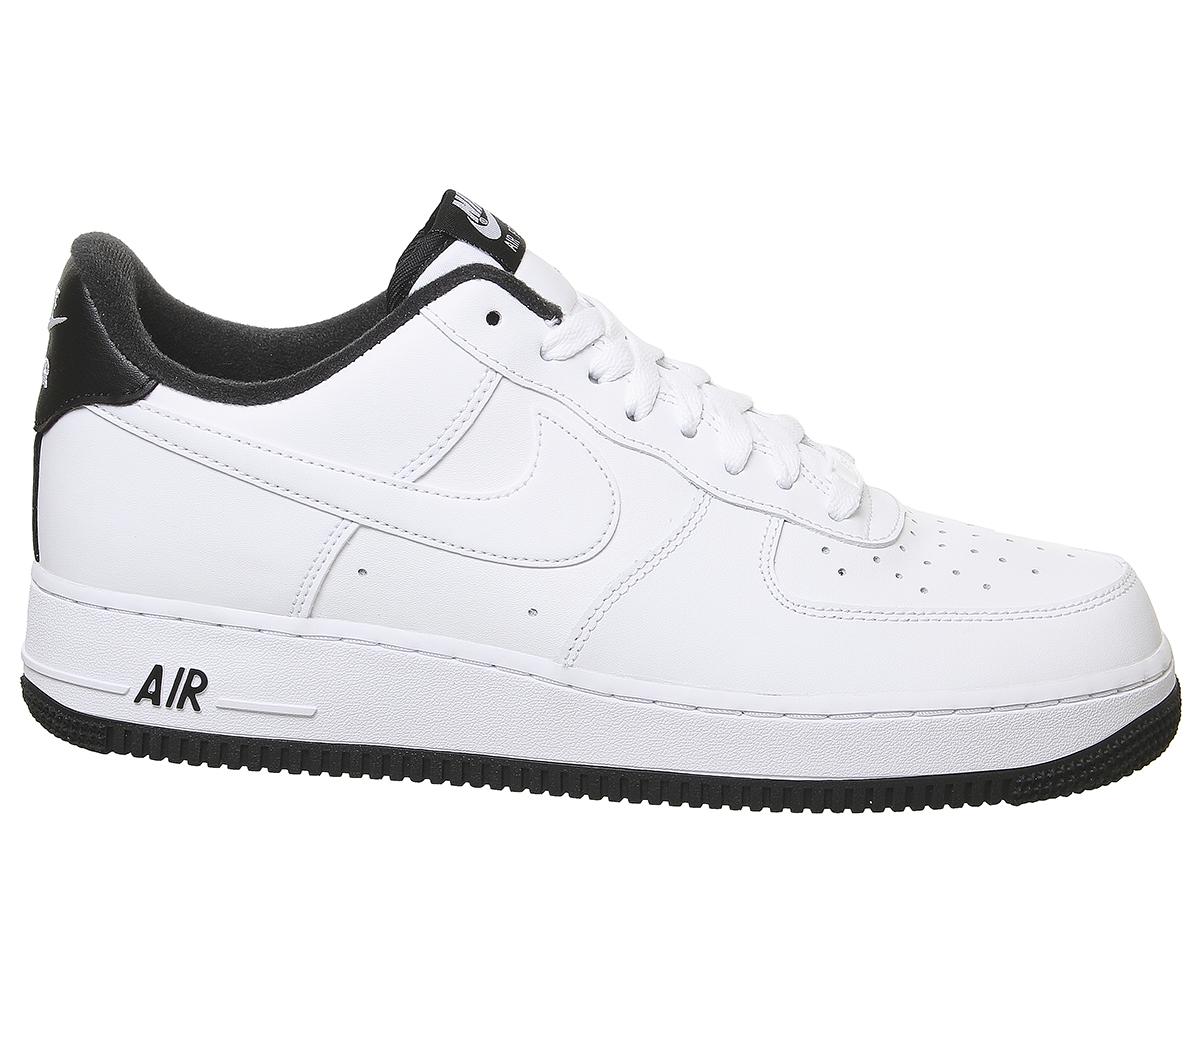 Nike Air Force 1 07 Trainers White Black White - His trainers